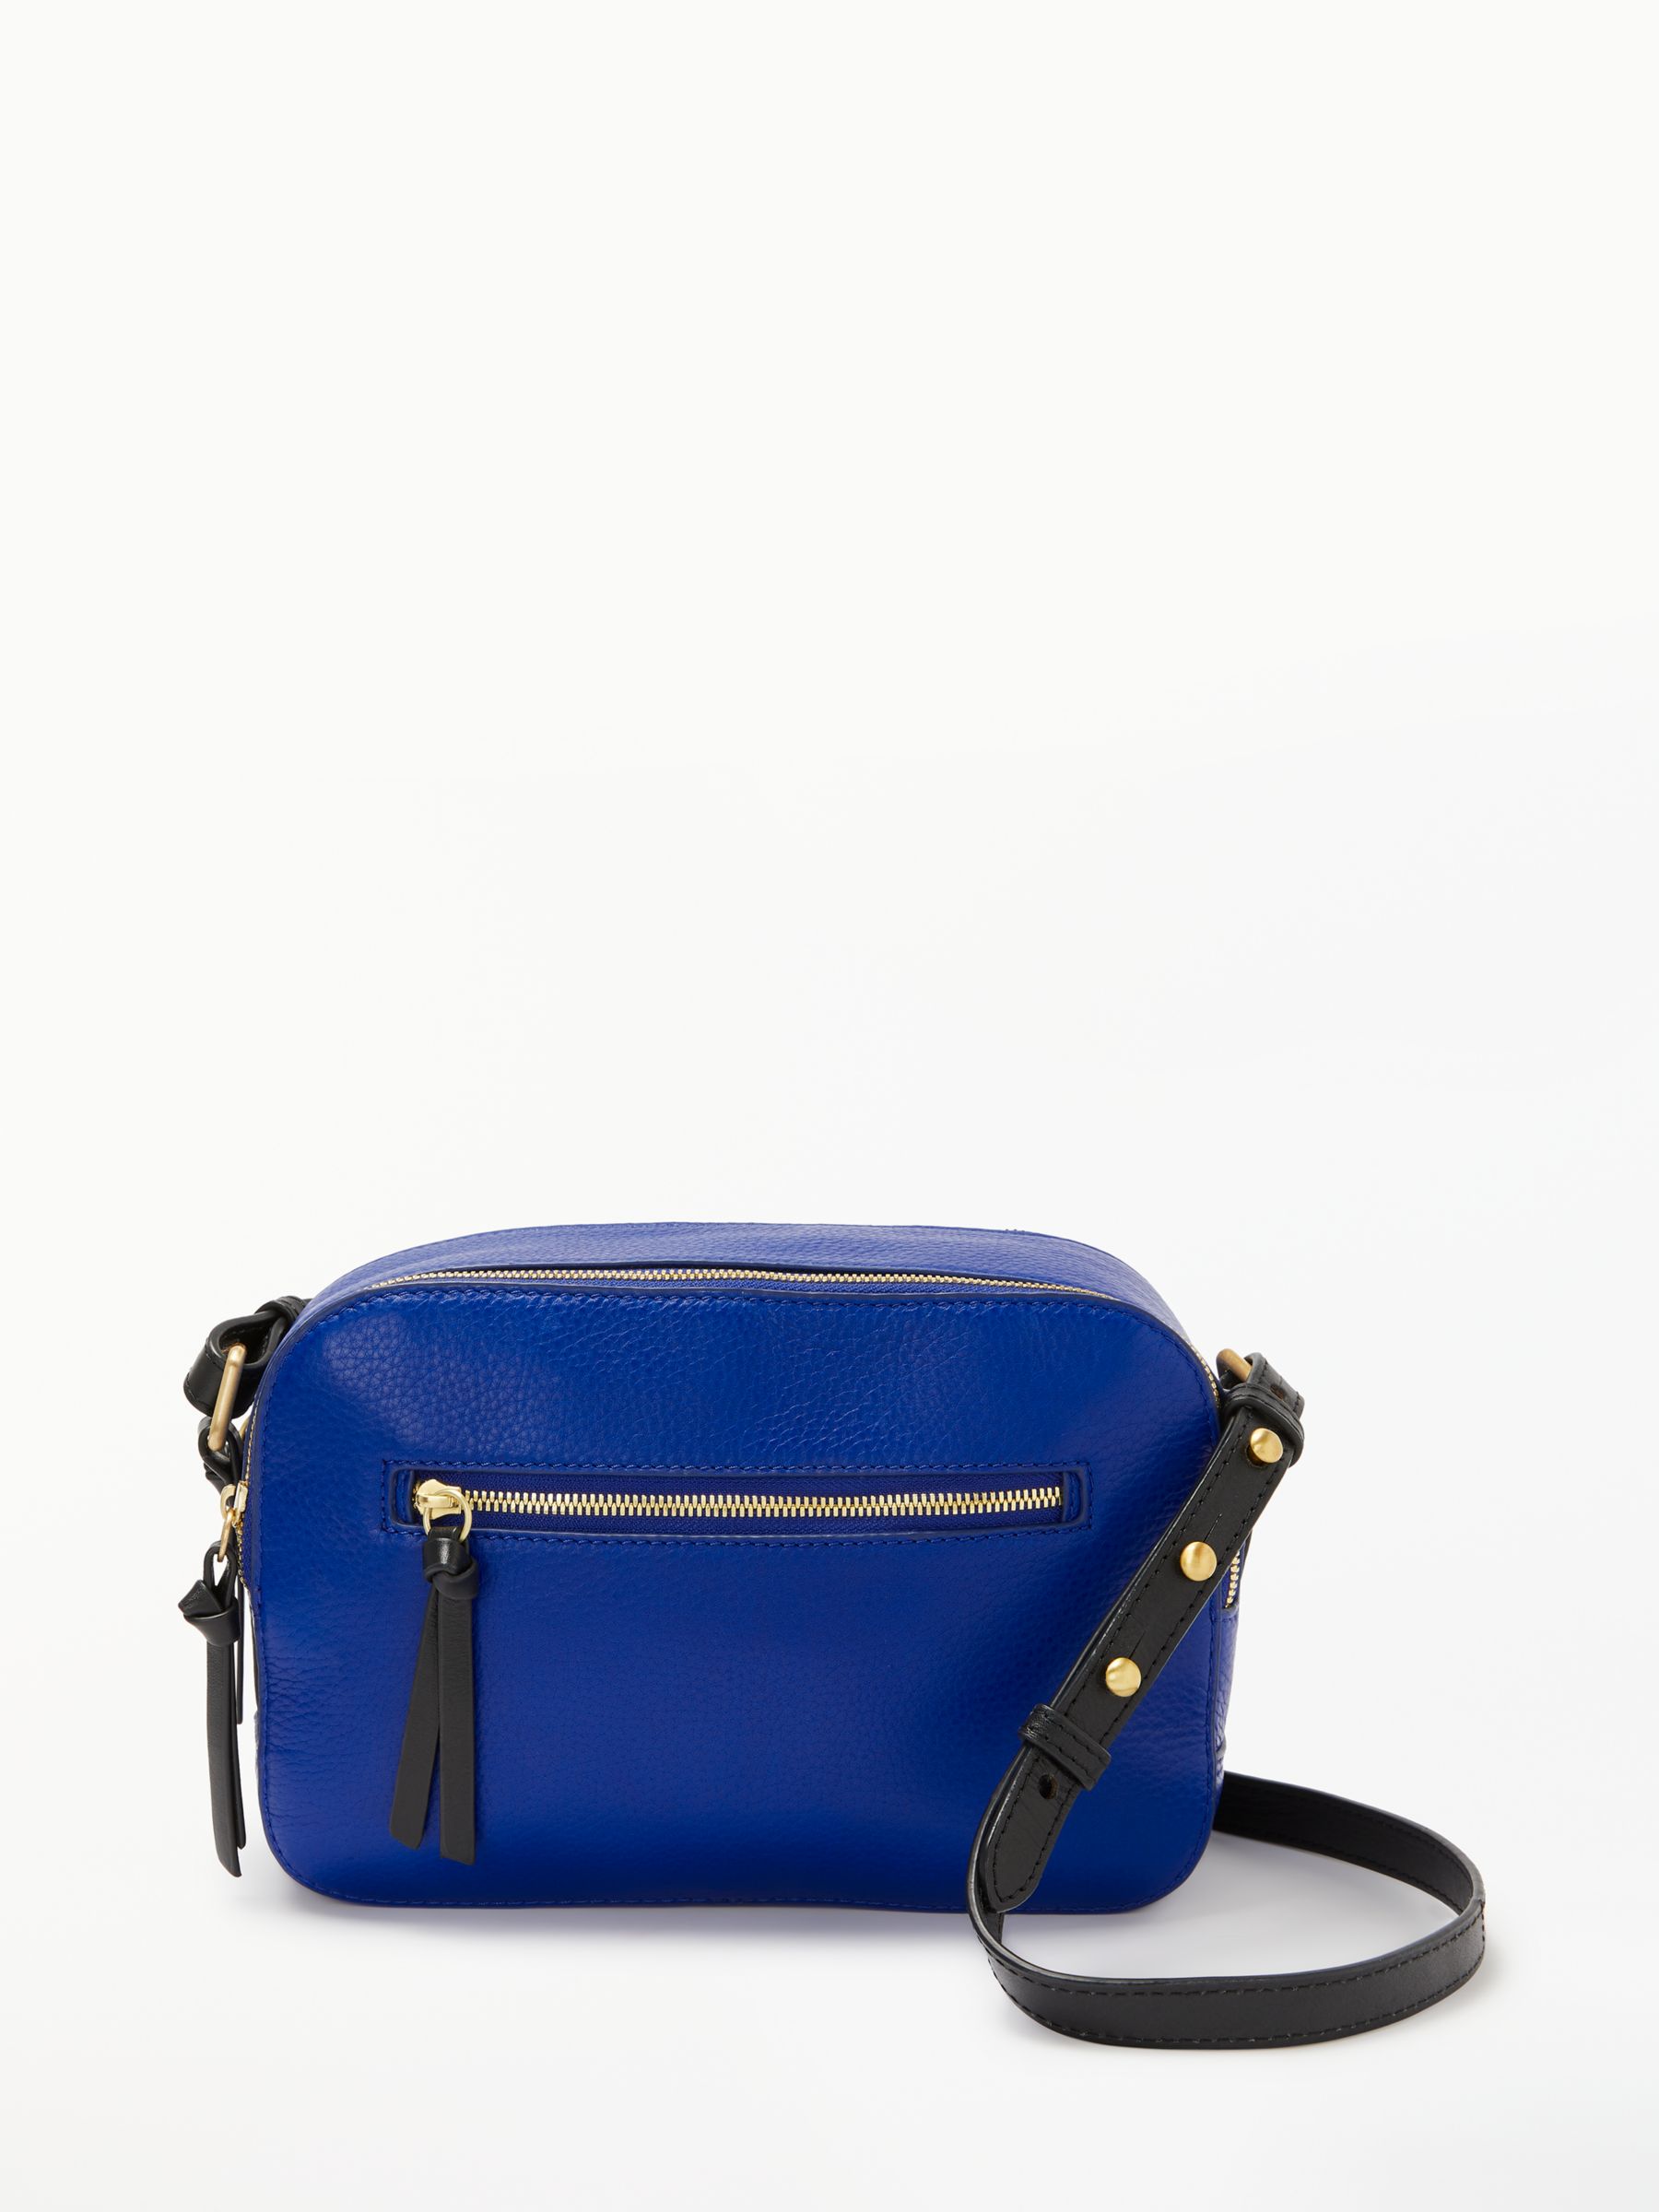 john lewis leather bags